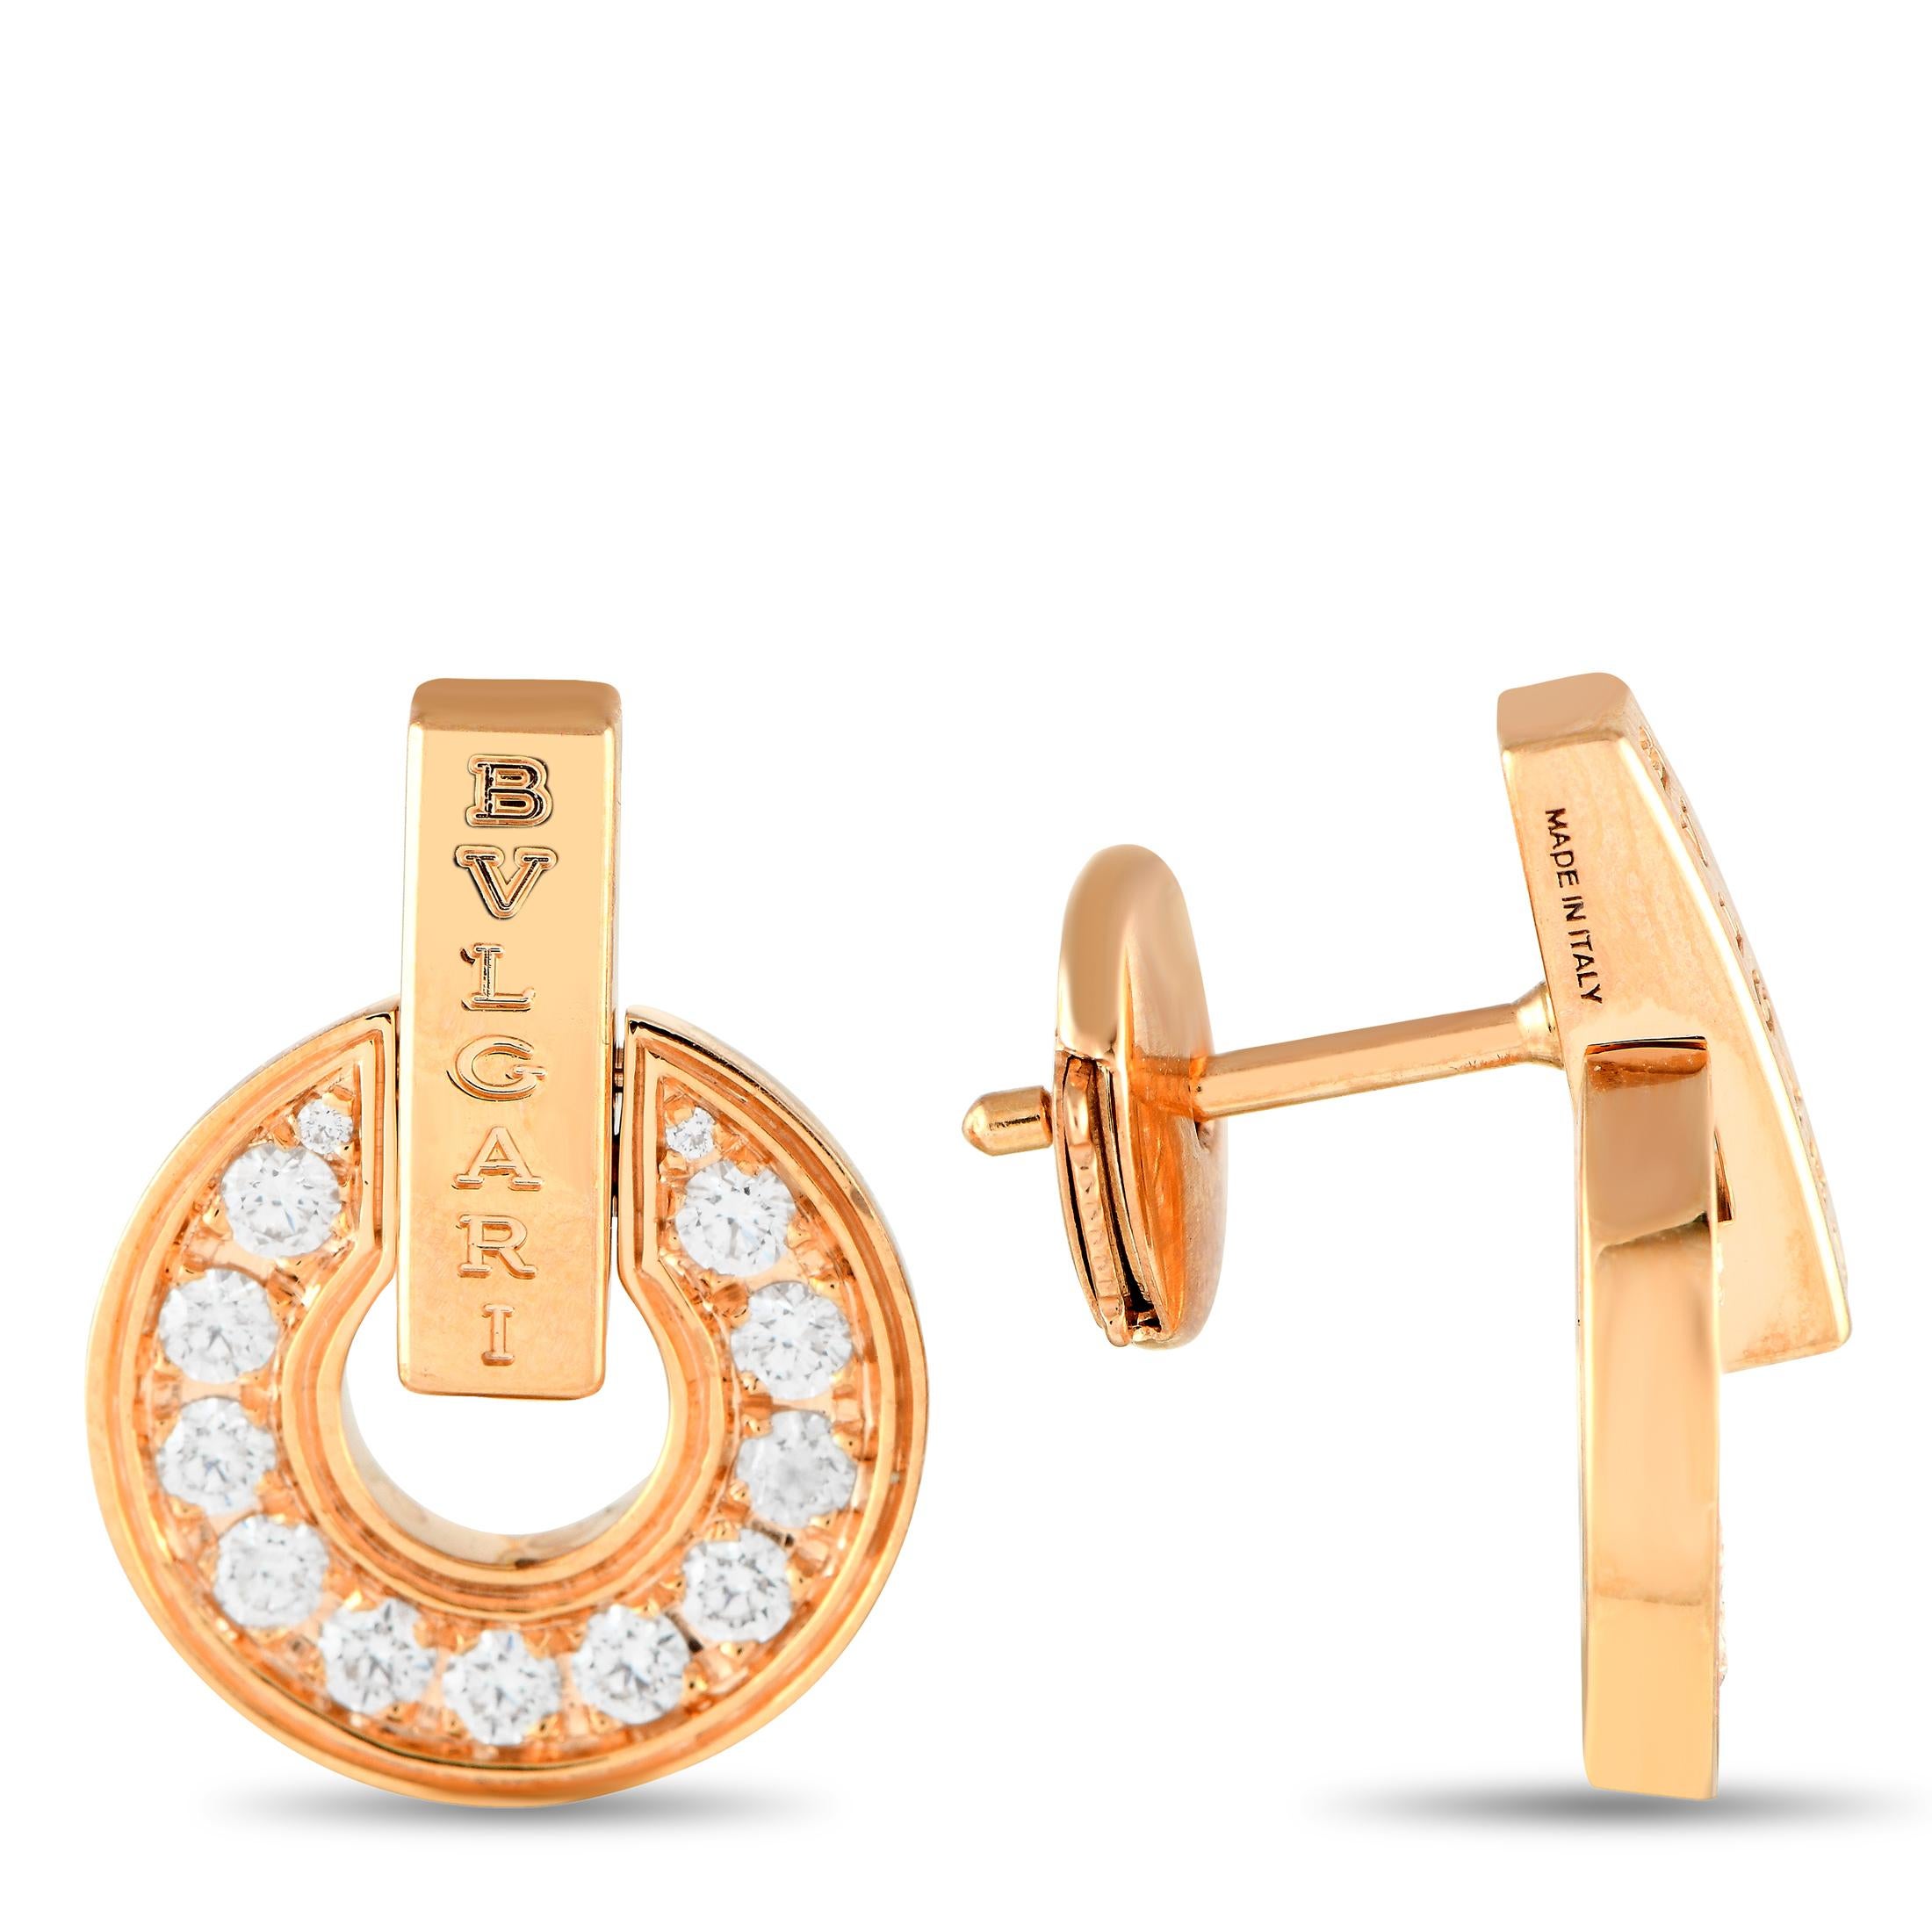 Let the restrained elegance of these Bvlgari earrings add interest to an otherwise plain outfit. The earrings feature a rose gold circlet fully set with pav diamonds and bisected by a rose gold bar post with a Bvlgari text logo.Offered in estate